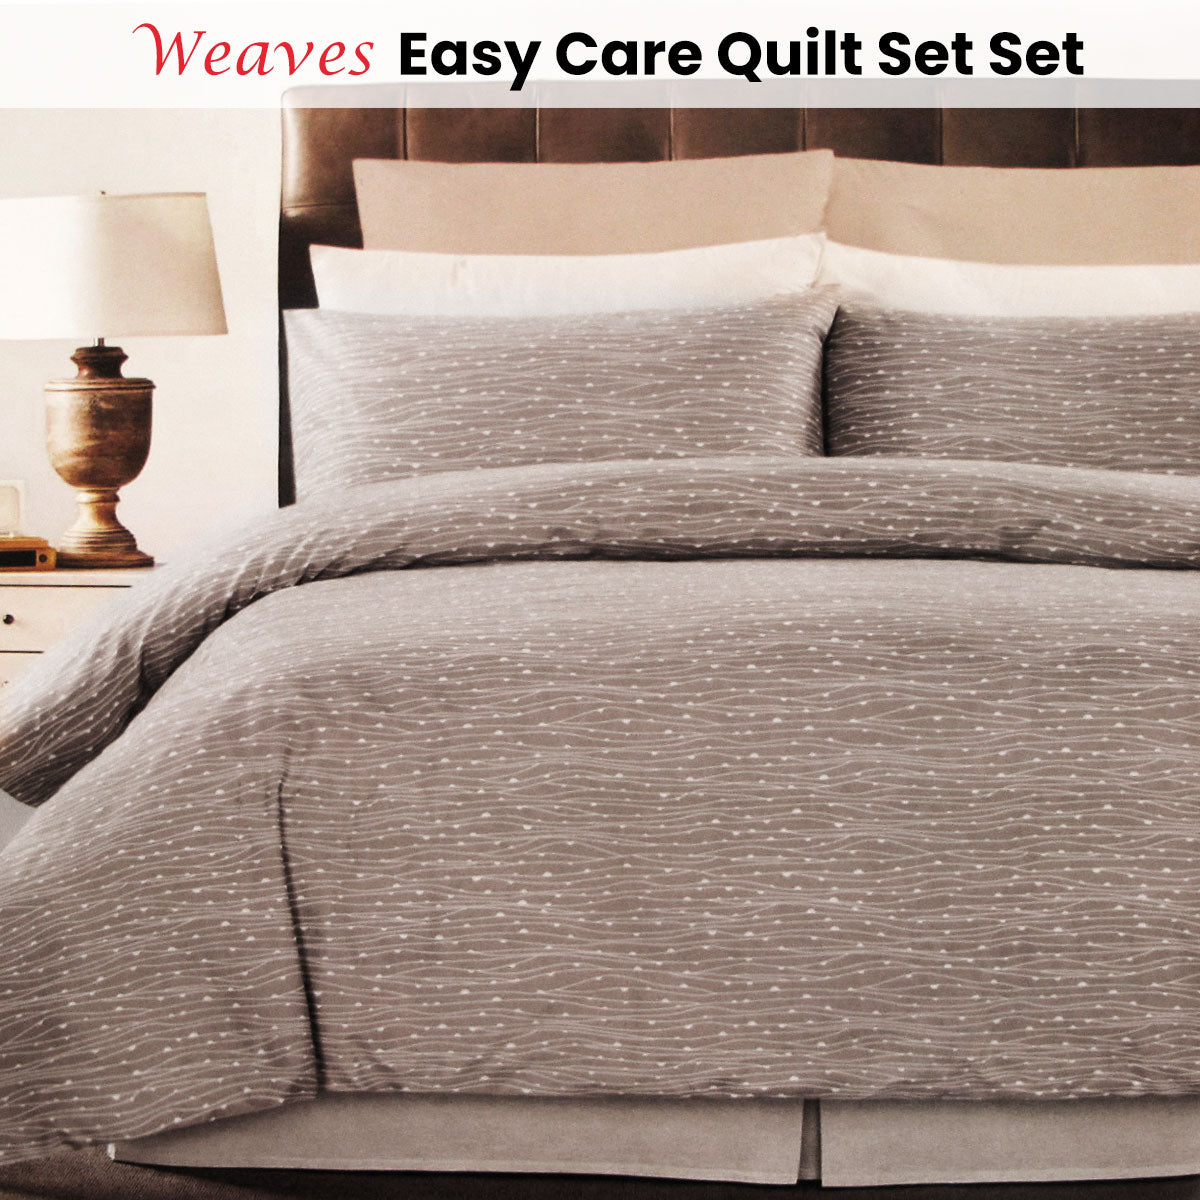 Weaves Coffee Easy Care Quilt Cover Set King